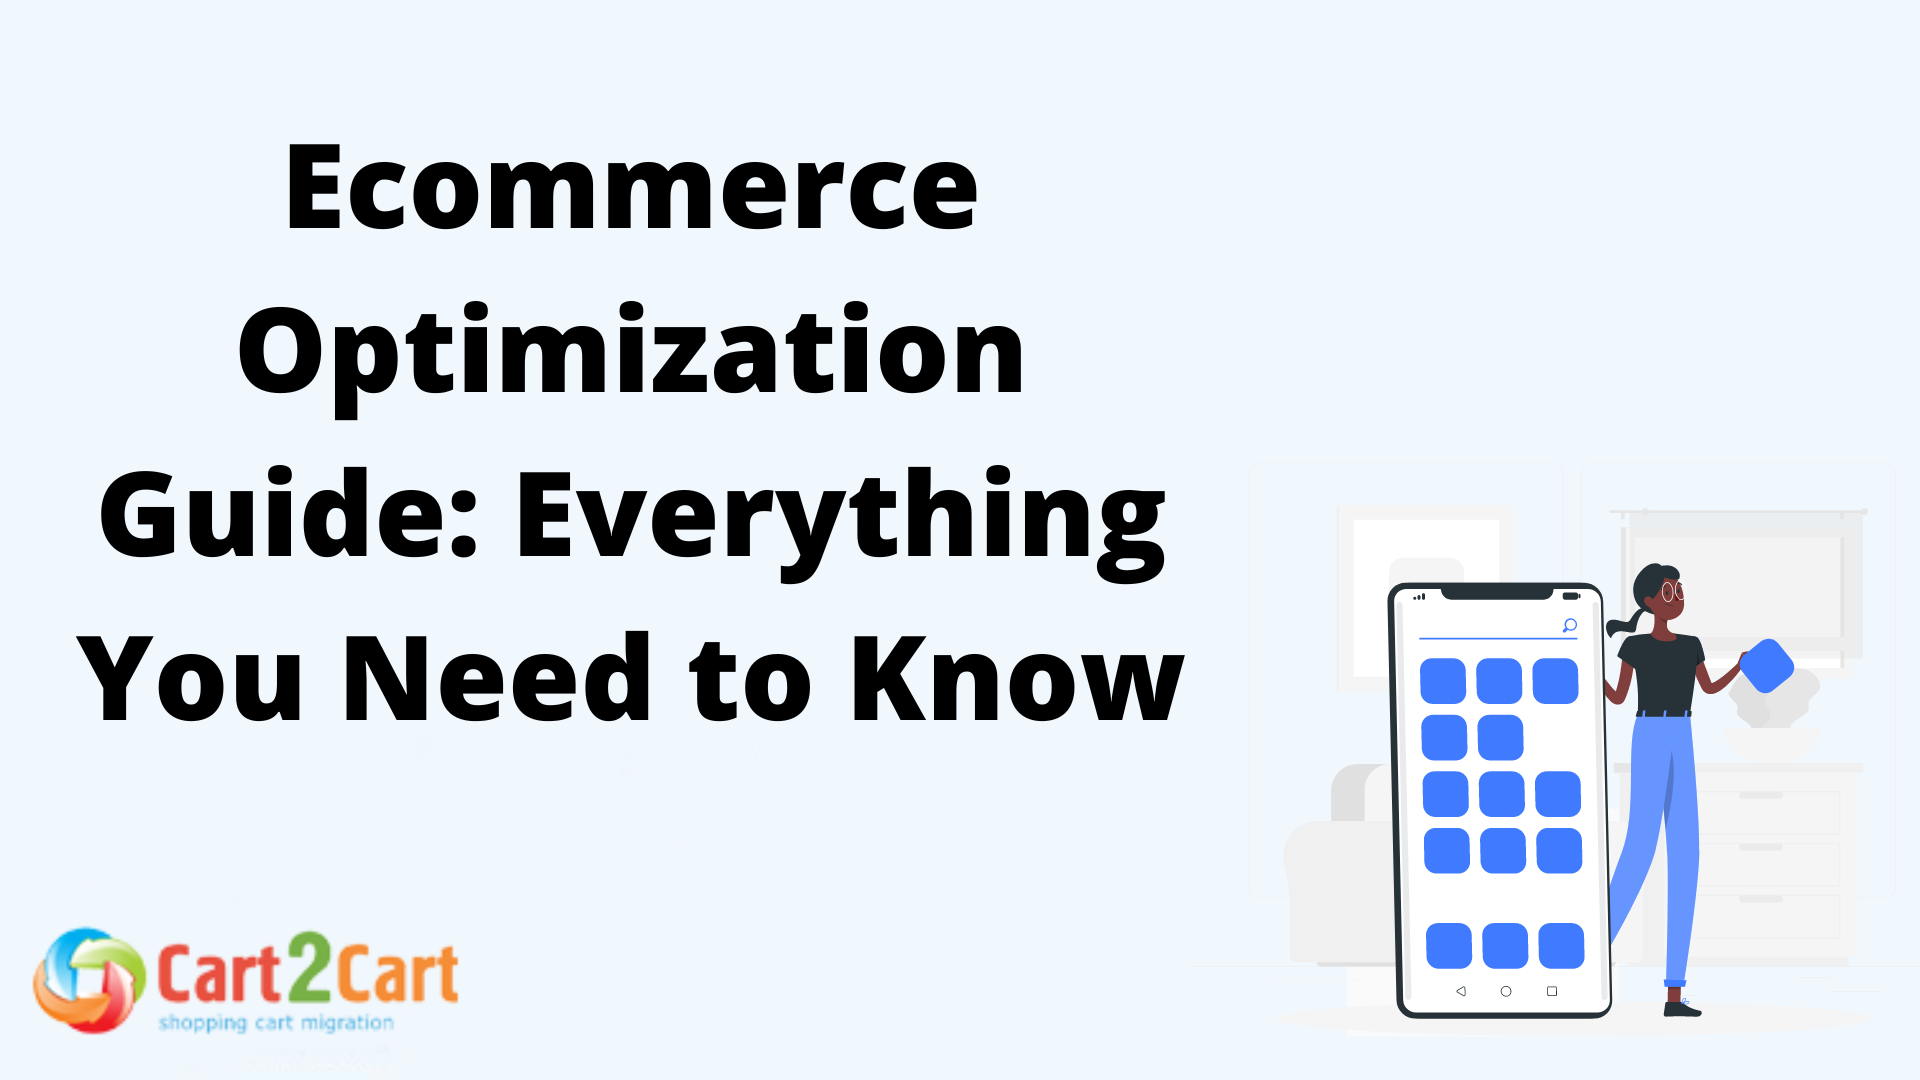 Ecommerce Optimization Guide: Everything You Need to Know